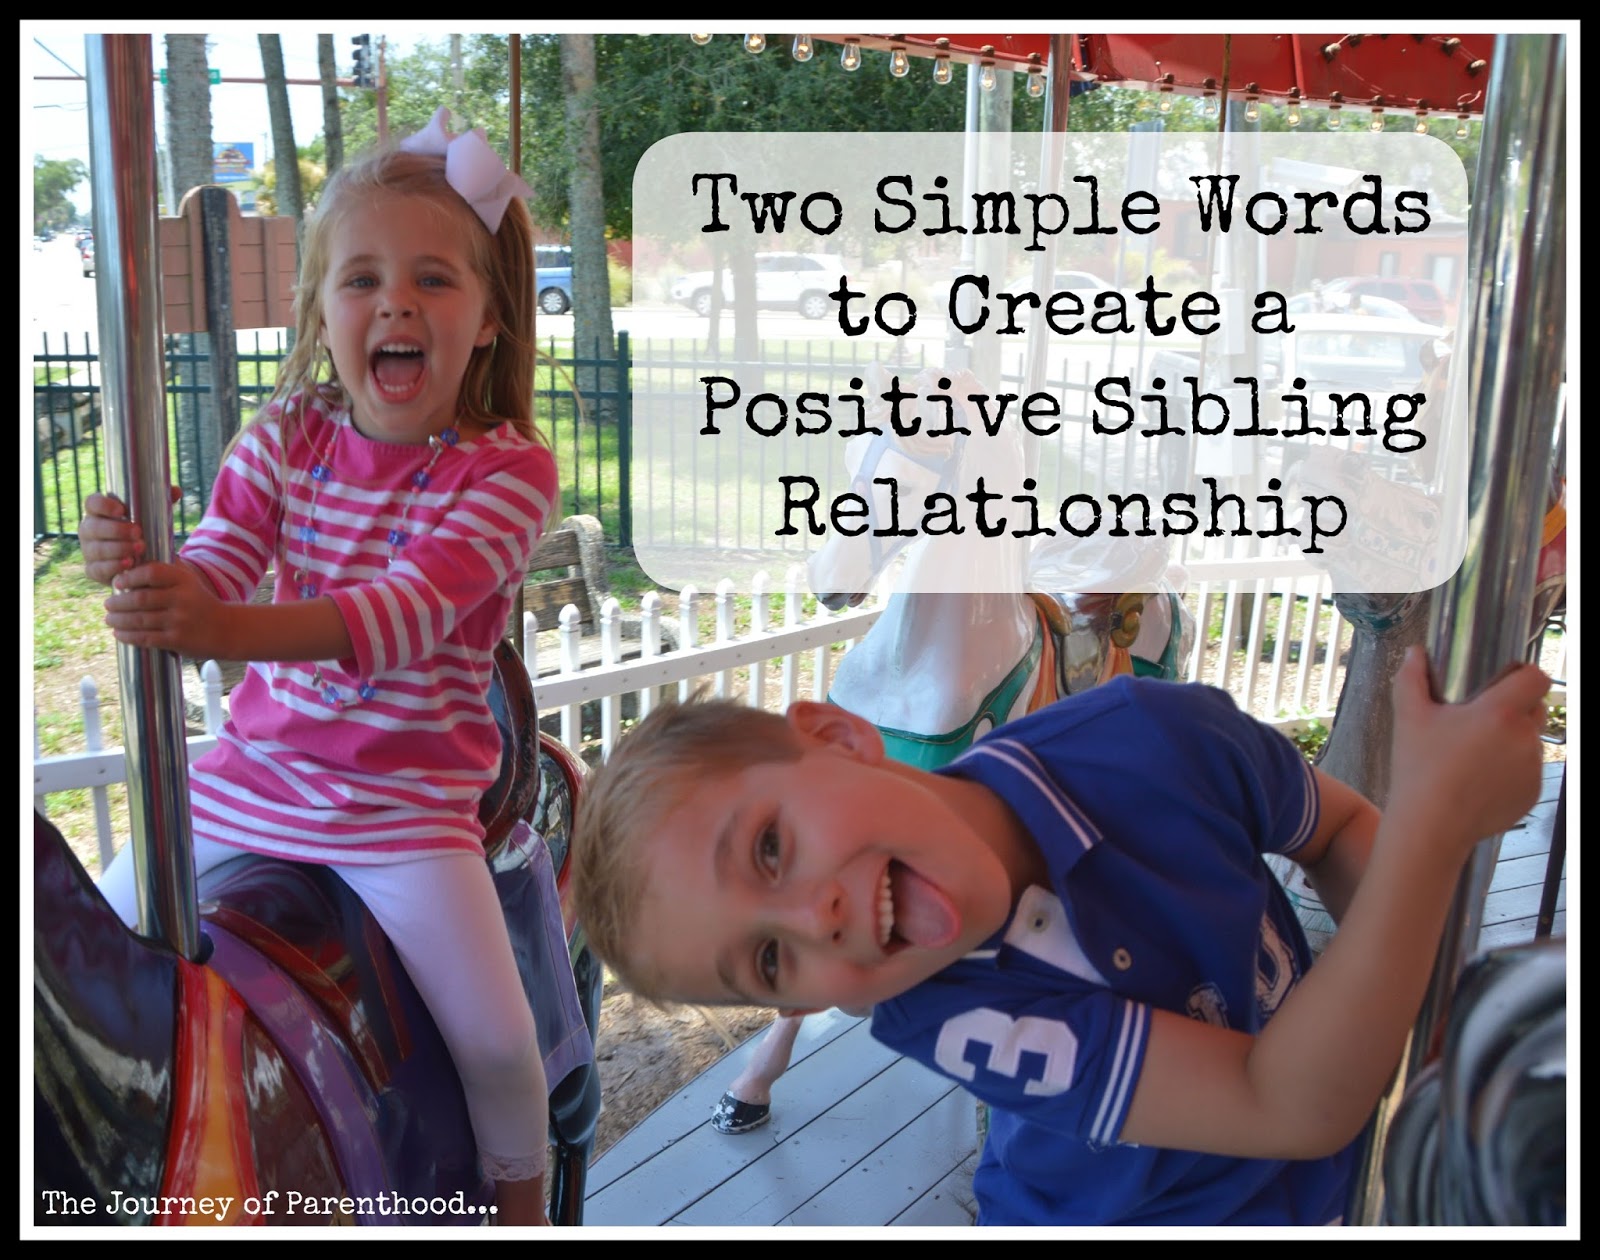 Two Simple Words to Create a Positive Sibling Relationship